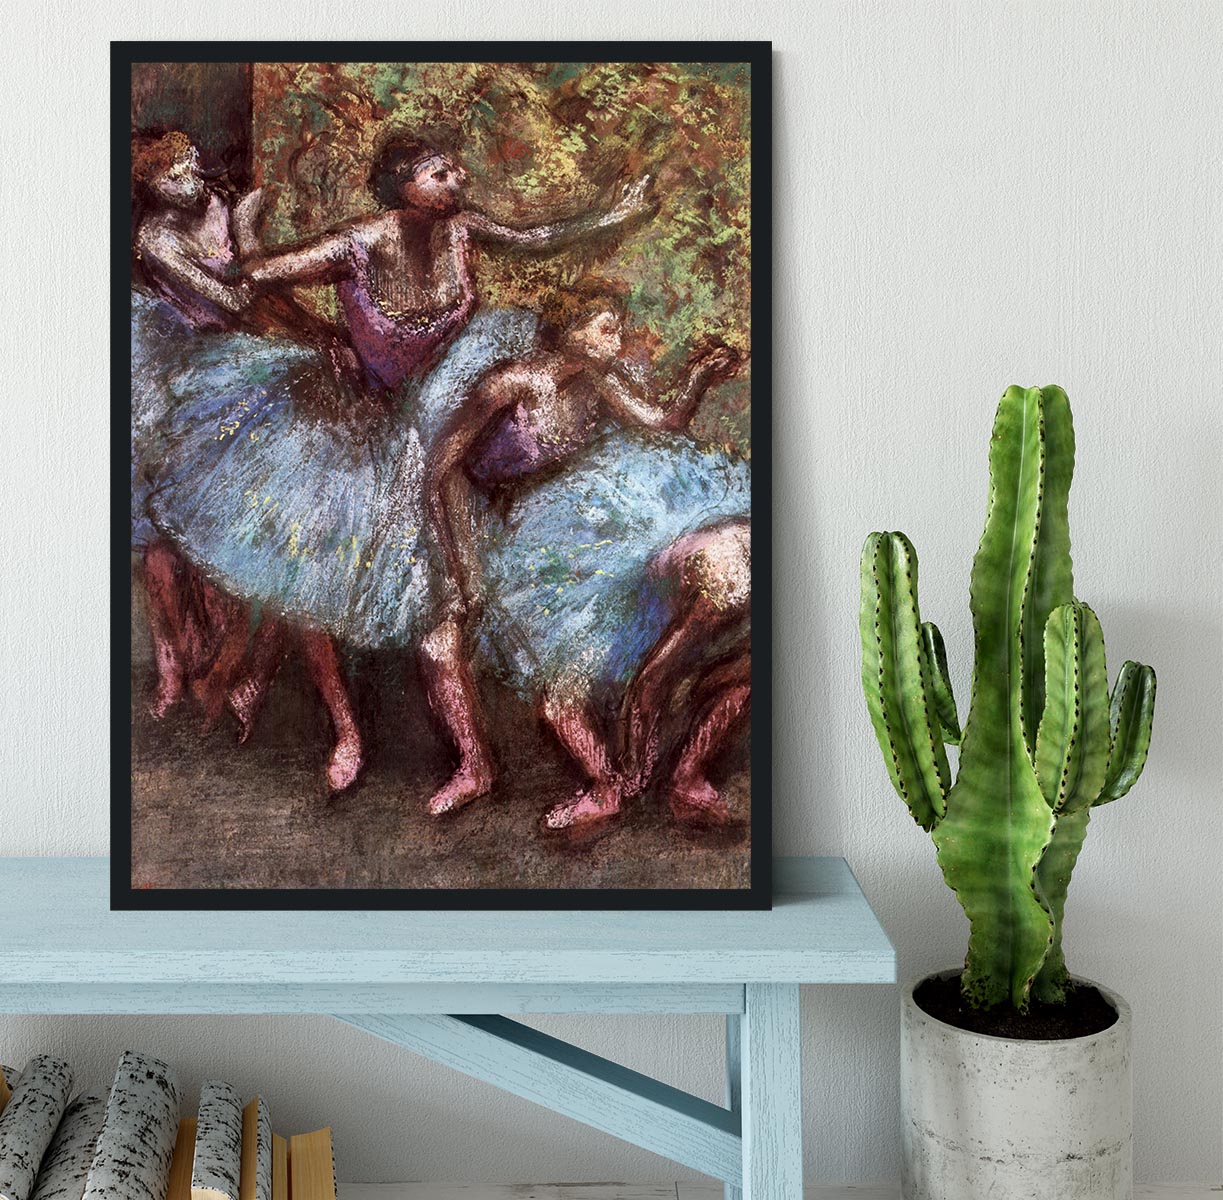 Four dancers behind the scenes 1 by Degas Framed Print - Canvas Art Rocks - 2